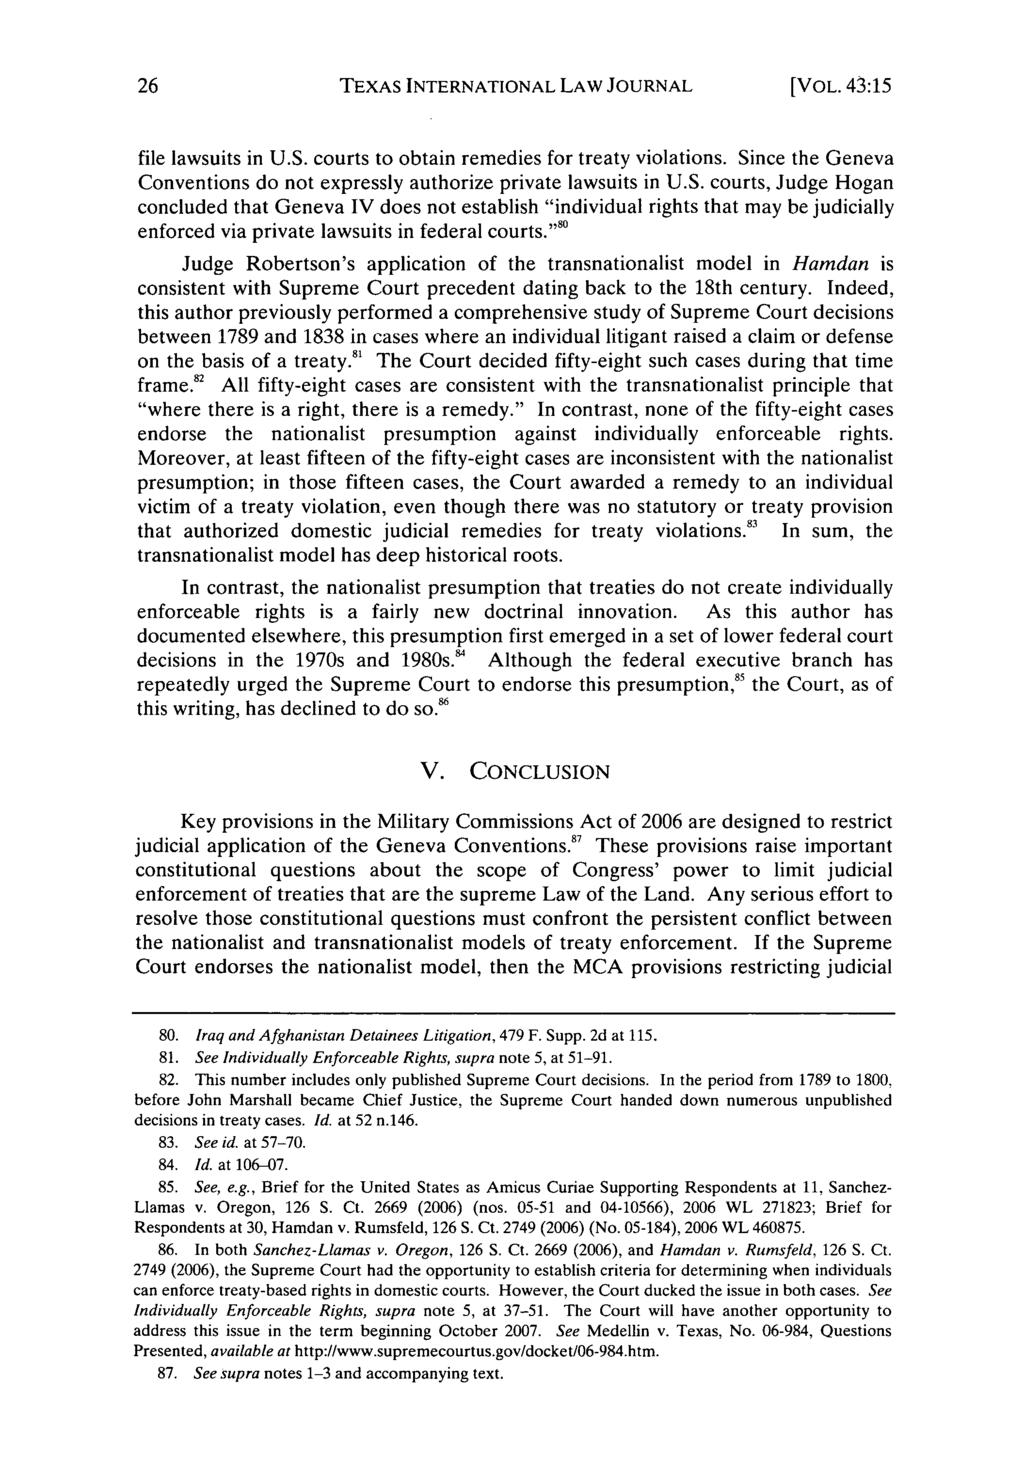 TEXAS INTERNATIONAL LAW JOURNAL [VOL. 41:15 file lawsuits in U.S. courts to obtain remedies for treaty violations. Since the Geneva Conventions do not expressly authorize private lawsuits in U.S. courts, Judge Hogan concluded that Geneva IV does not establish "individual rights that may be judicially enforced via private lawsuits in federal courts.